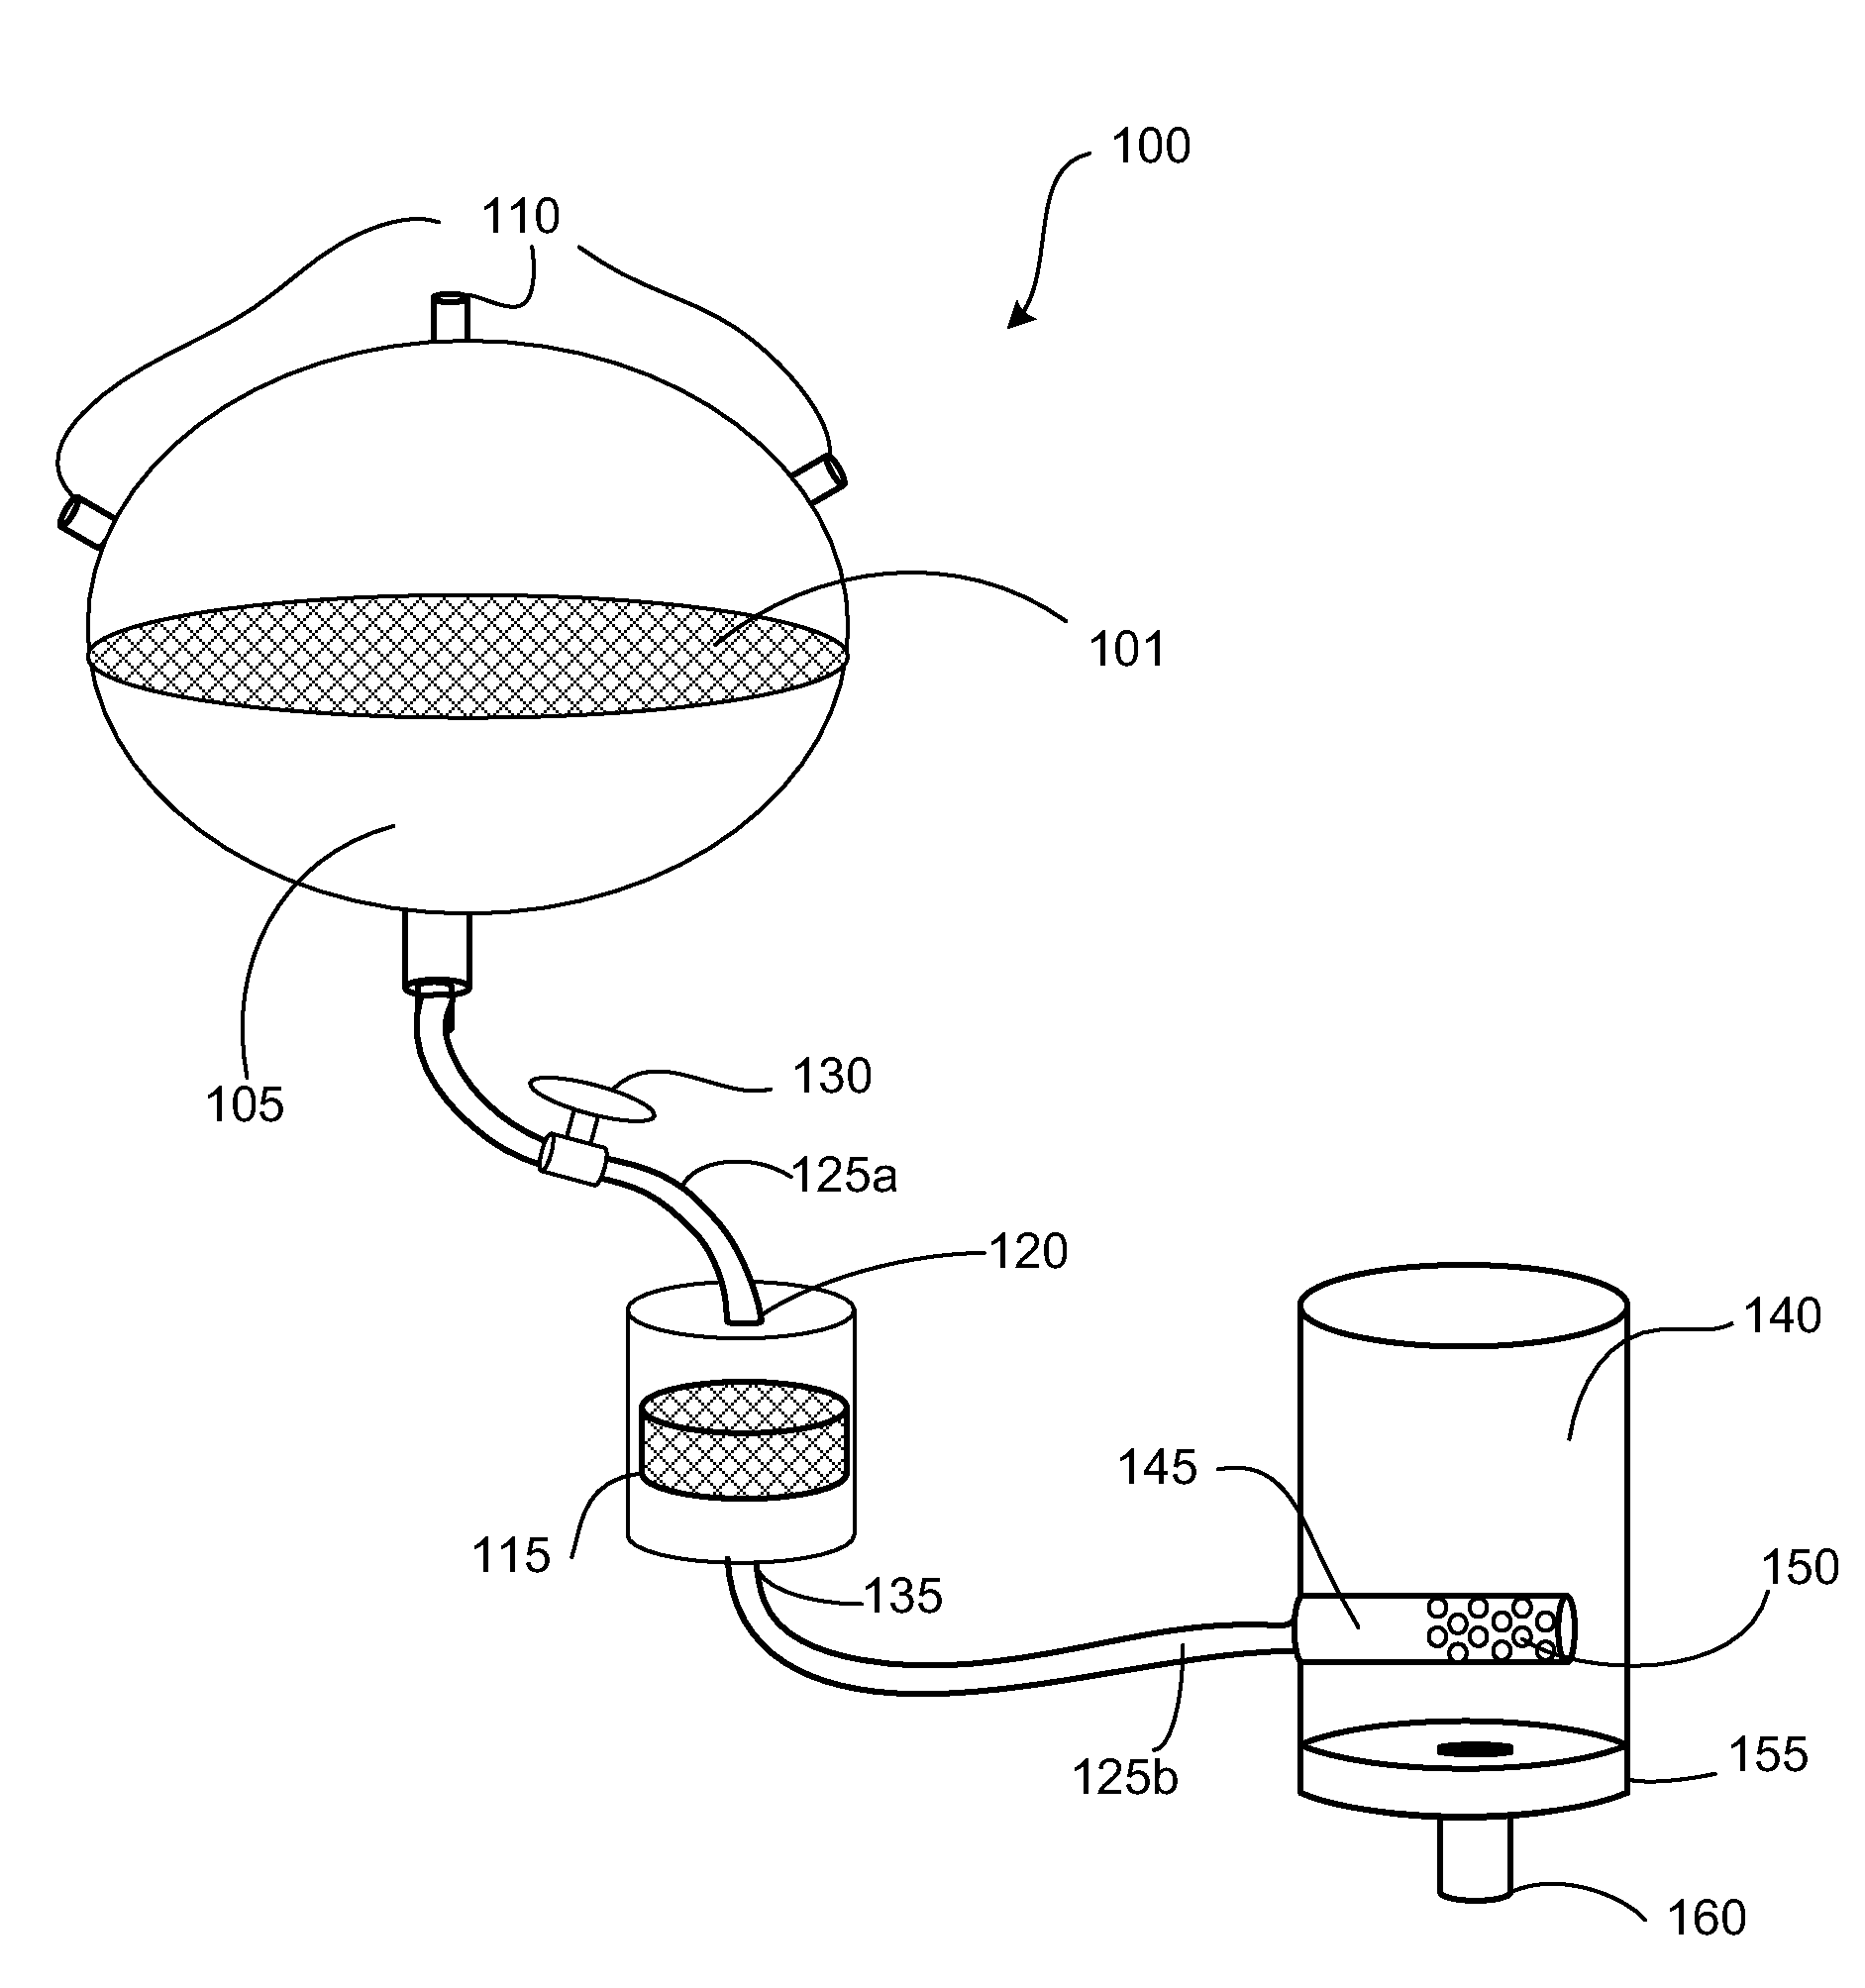 Apparatus and Methods for Cell Isolation